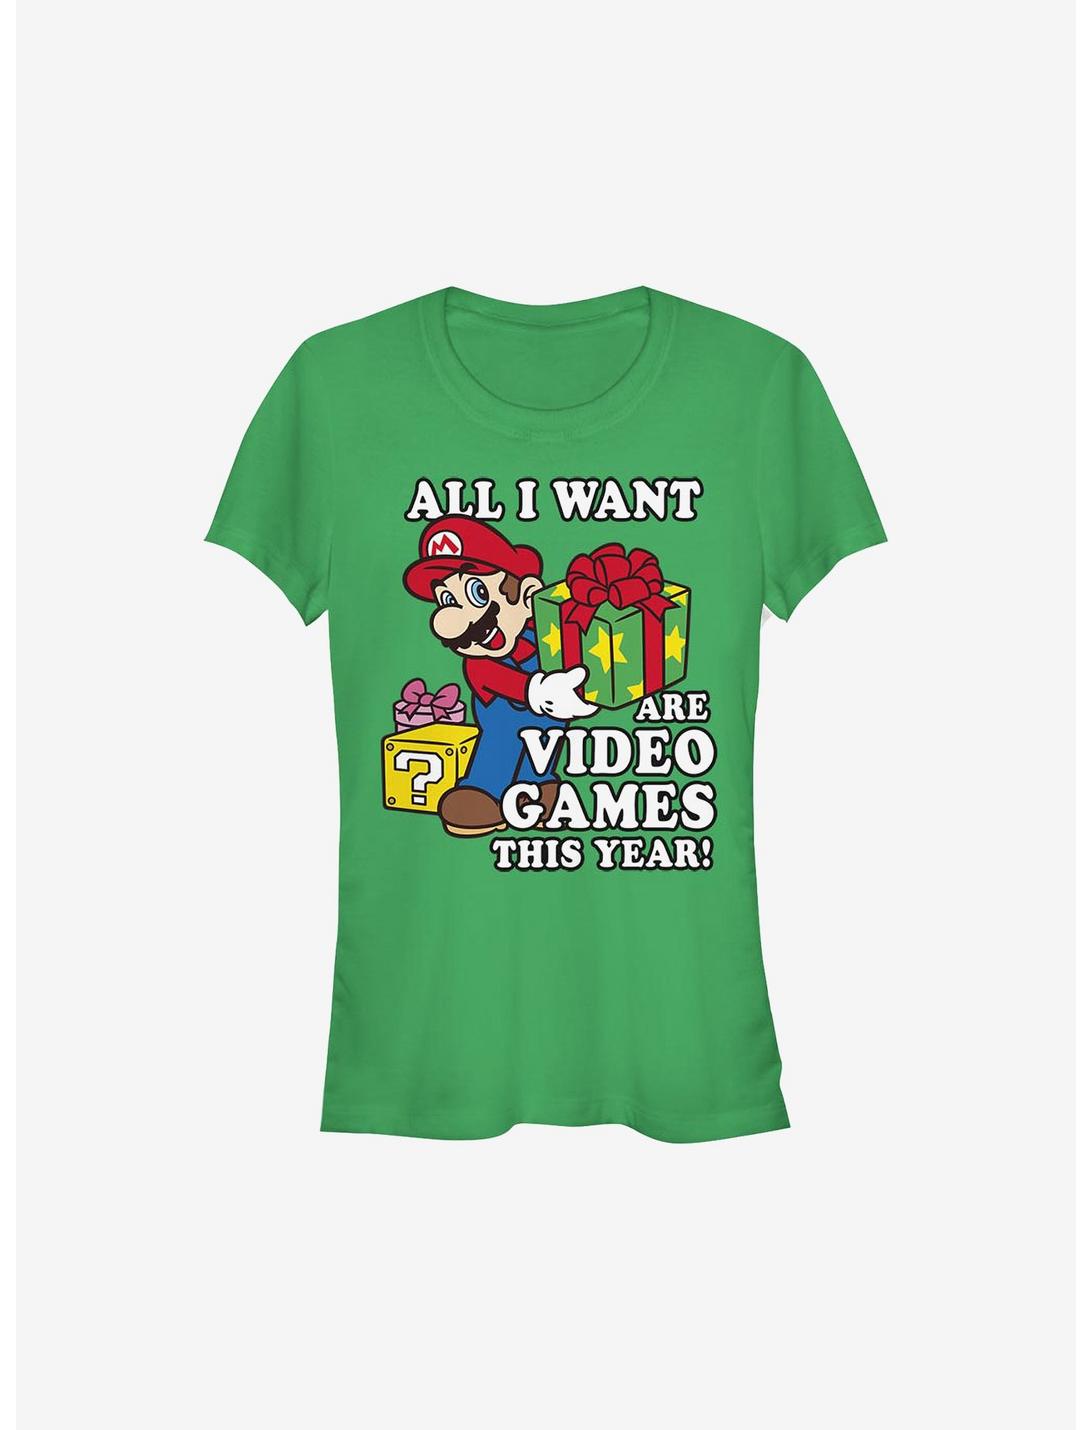 Super Mario All I Want Are Video Games Holiday Girls T-Shirt, KELLY, hi-res